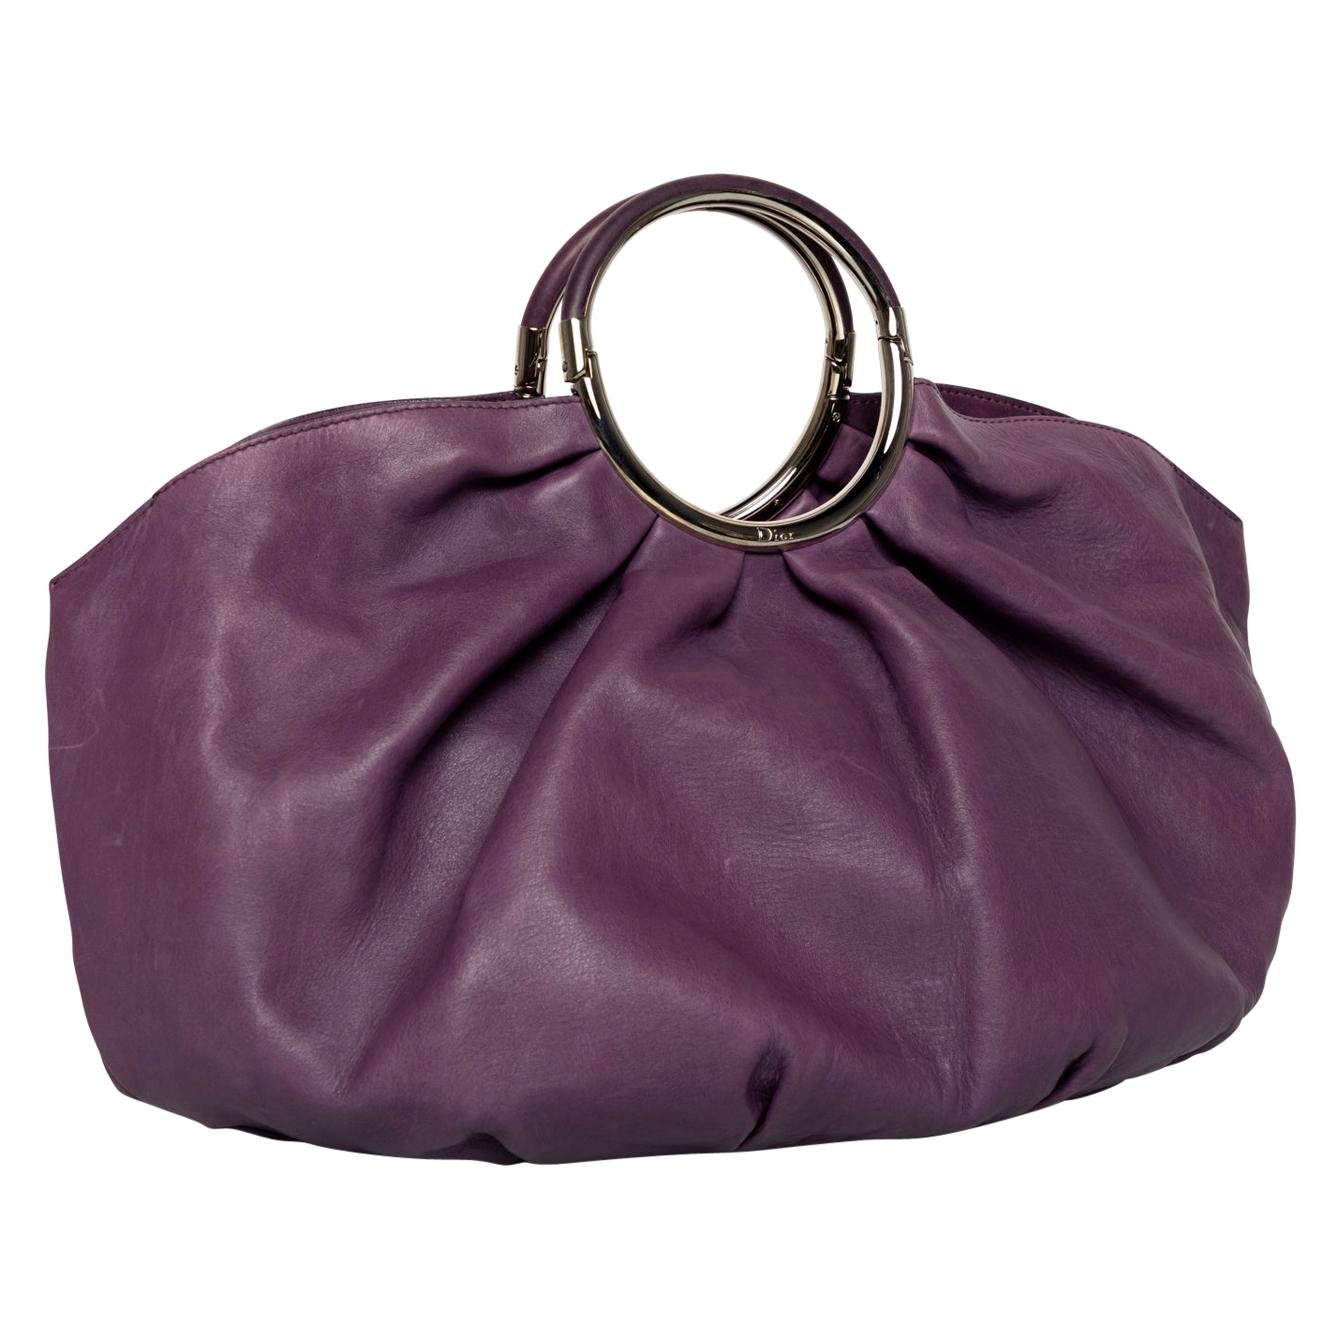  Christian Dior Purple Leather Babe Bag, 2008 For Sale